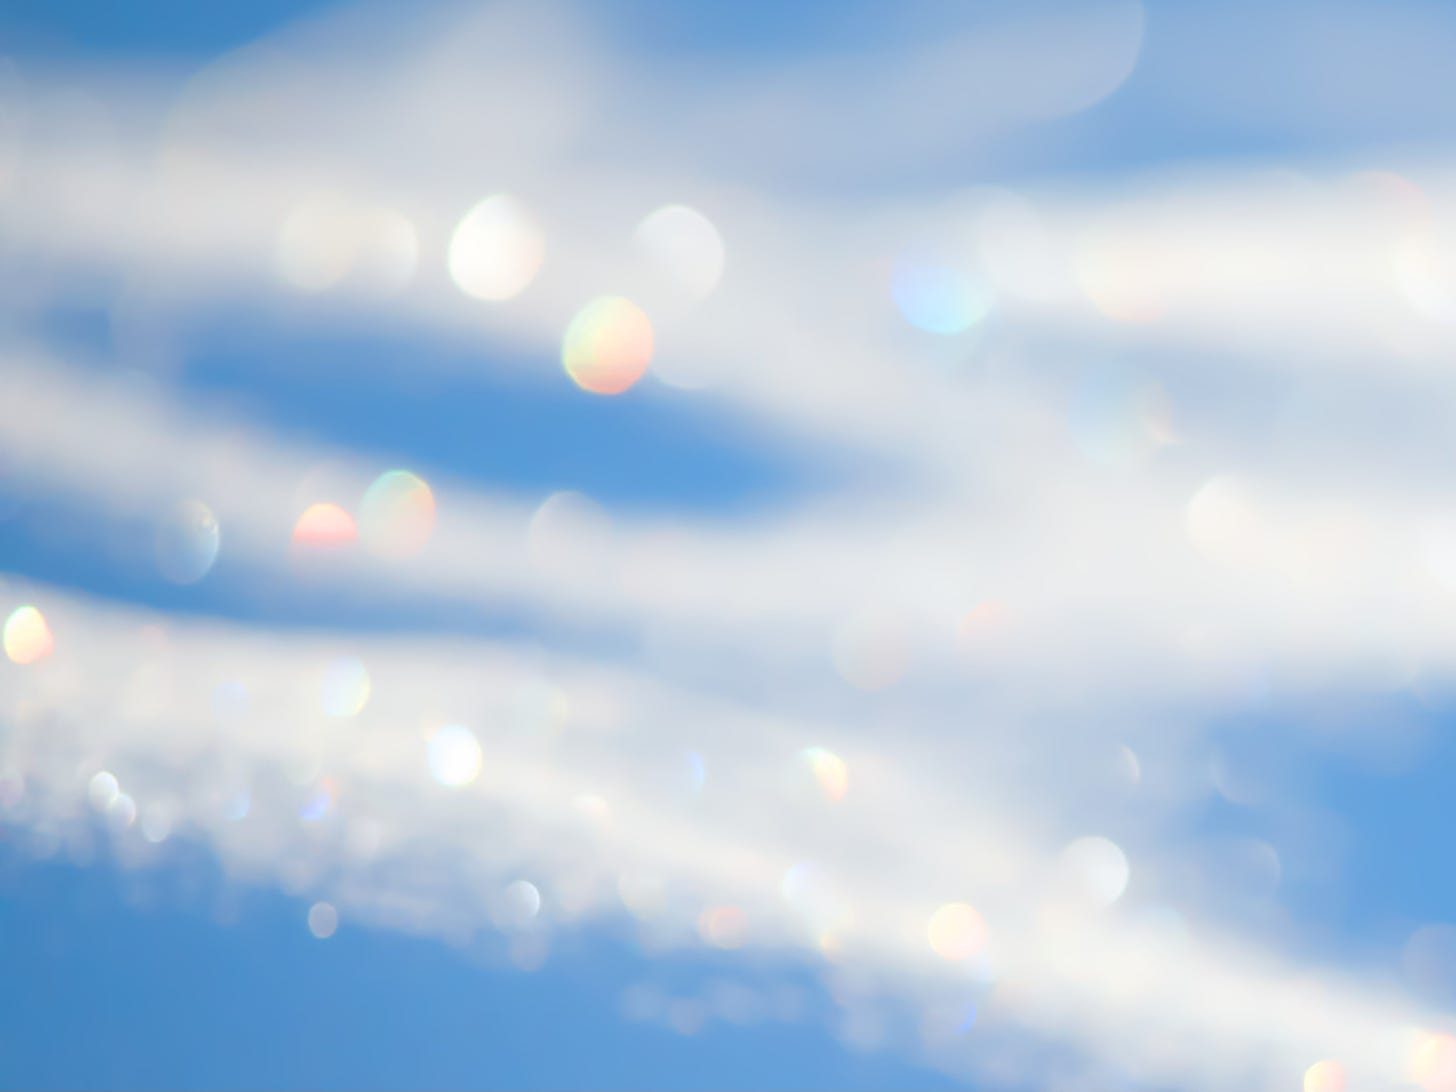 An abstract images uses a soft focus on snow, with blue shadows, white highlights, and rainbow bokeh.